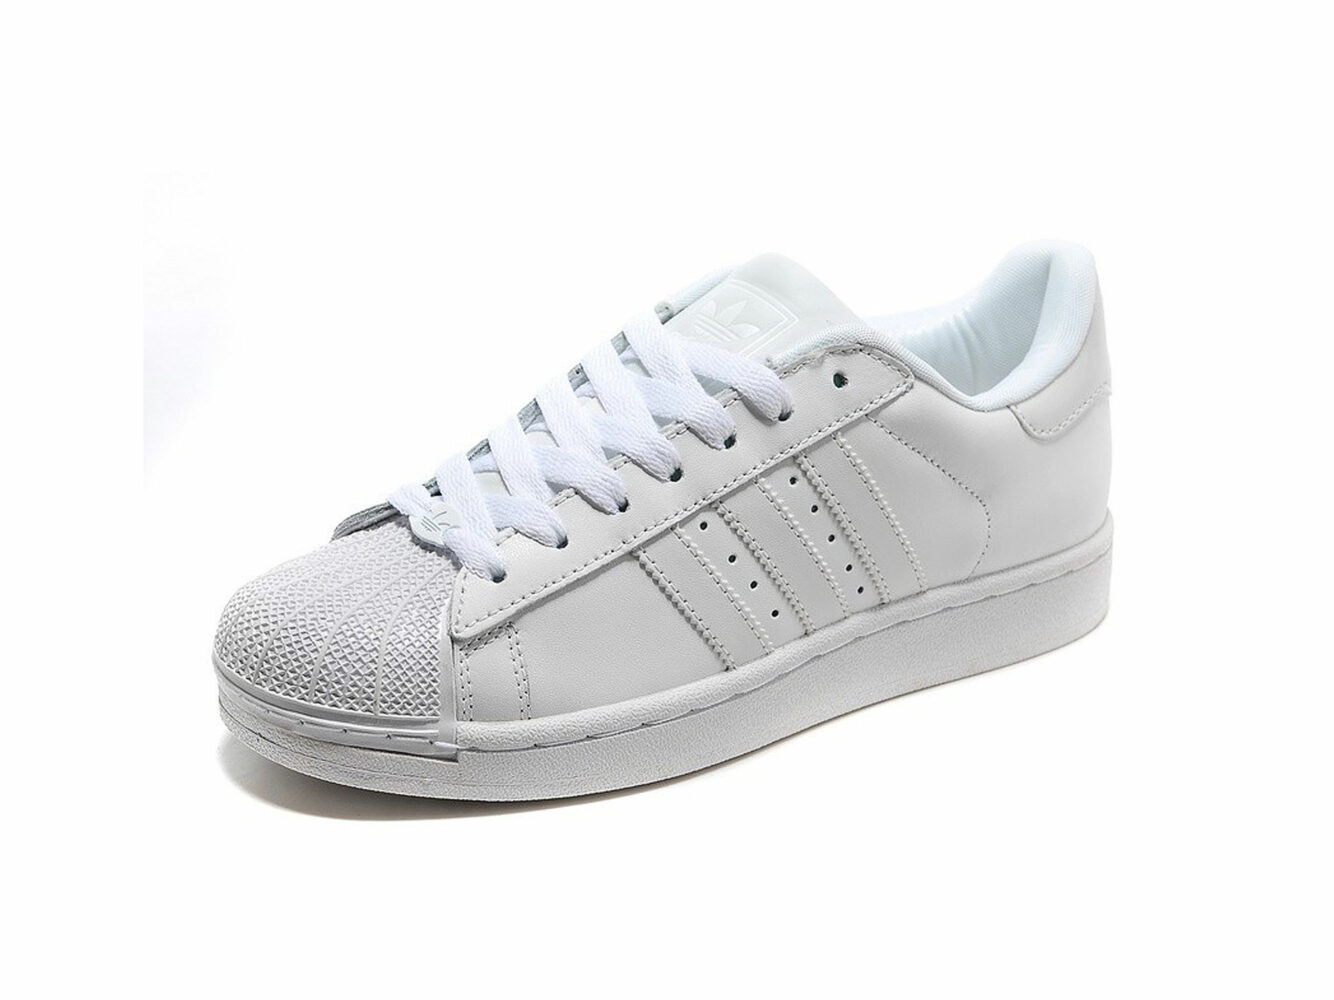 adidas superstar supercolor by Pharrell Williams white